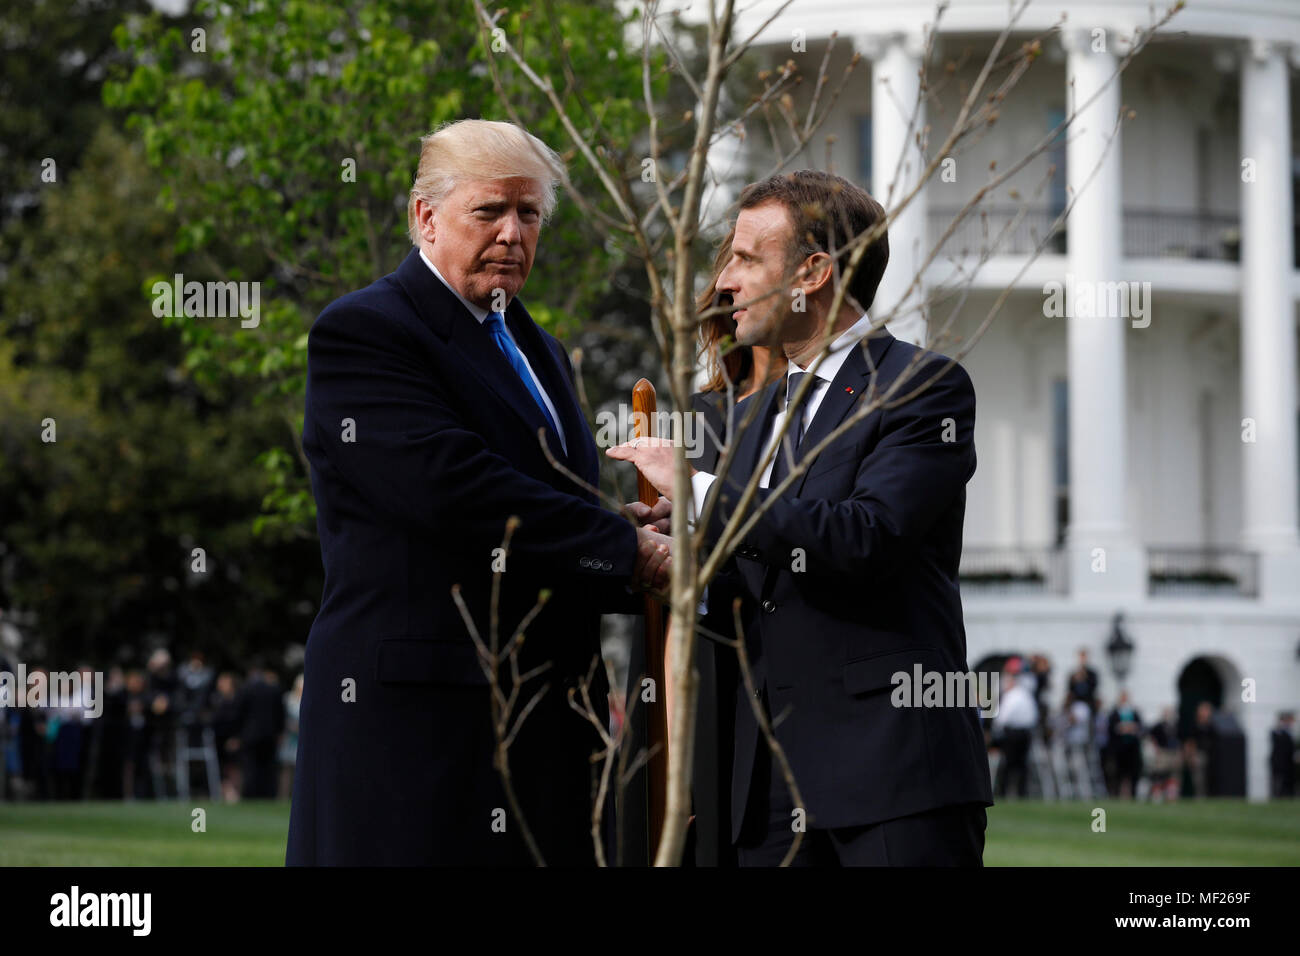 U.S. President Donald Trump and France's president Emmanuel Macron greet each other after planting a tree, a gift from the President and Mrs. Macron, on the South Lawn of the White House in Washington, D.C., U.S., on Monday, April 23, 2018. As Macron arrives for the first state visit of Trump's presidency, the U.S. leader is threatening to upend the global trading system with tariffs on China, maybe Europe too. Credit: Yuri Gripas / Pool via CNP  - NO WIRE SERVICE - Photo: Yuri Gripas/Pool via CNP/dpa Stock Photo